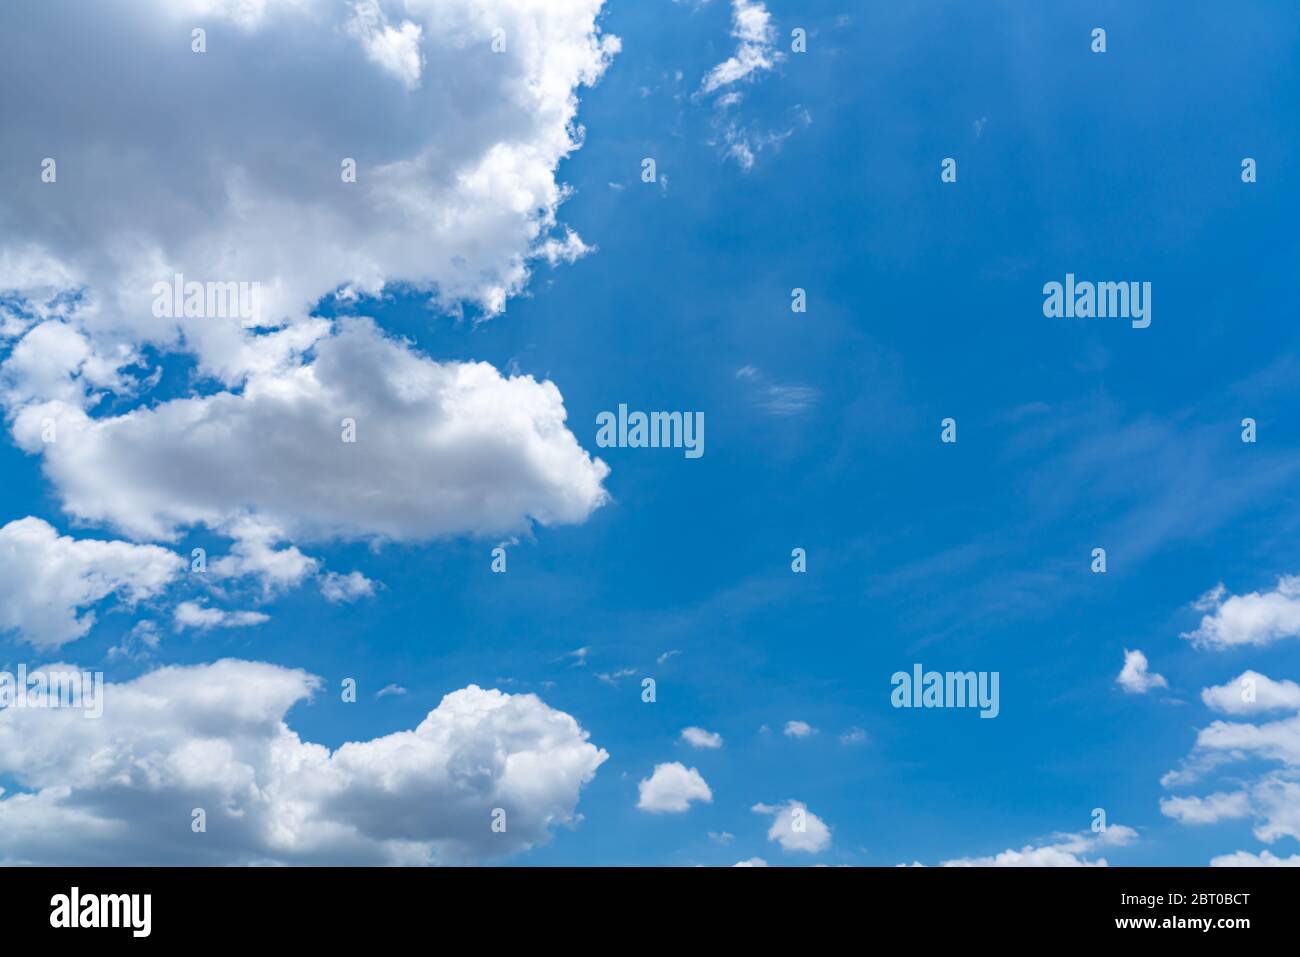 Beautiful blue sky background with white clouds in rainy season of Thailand. Stock Photo